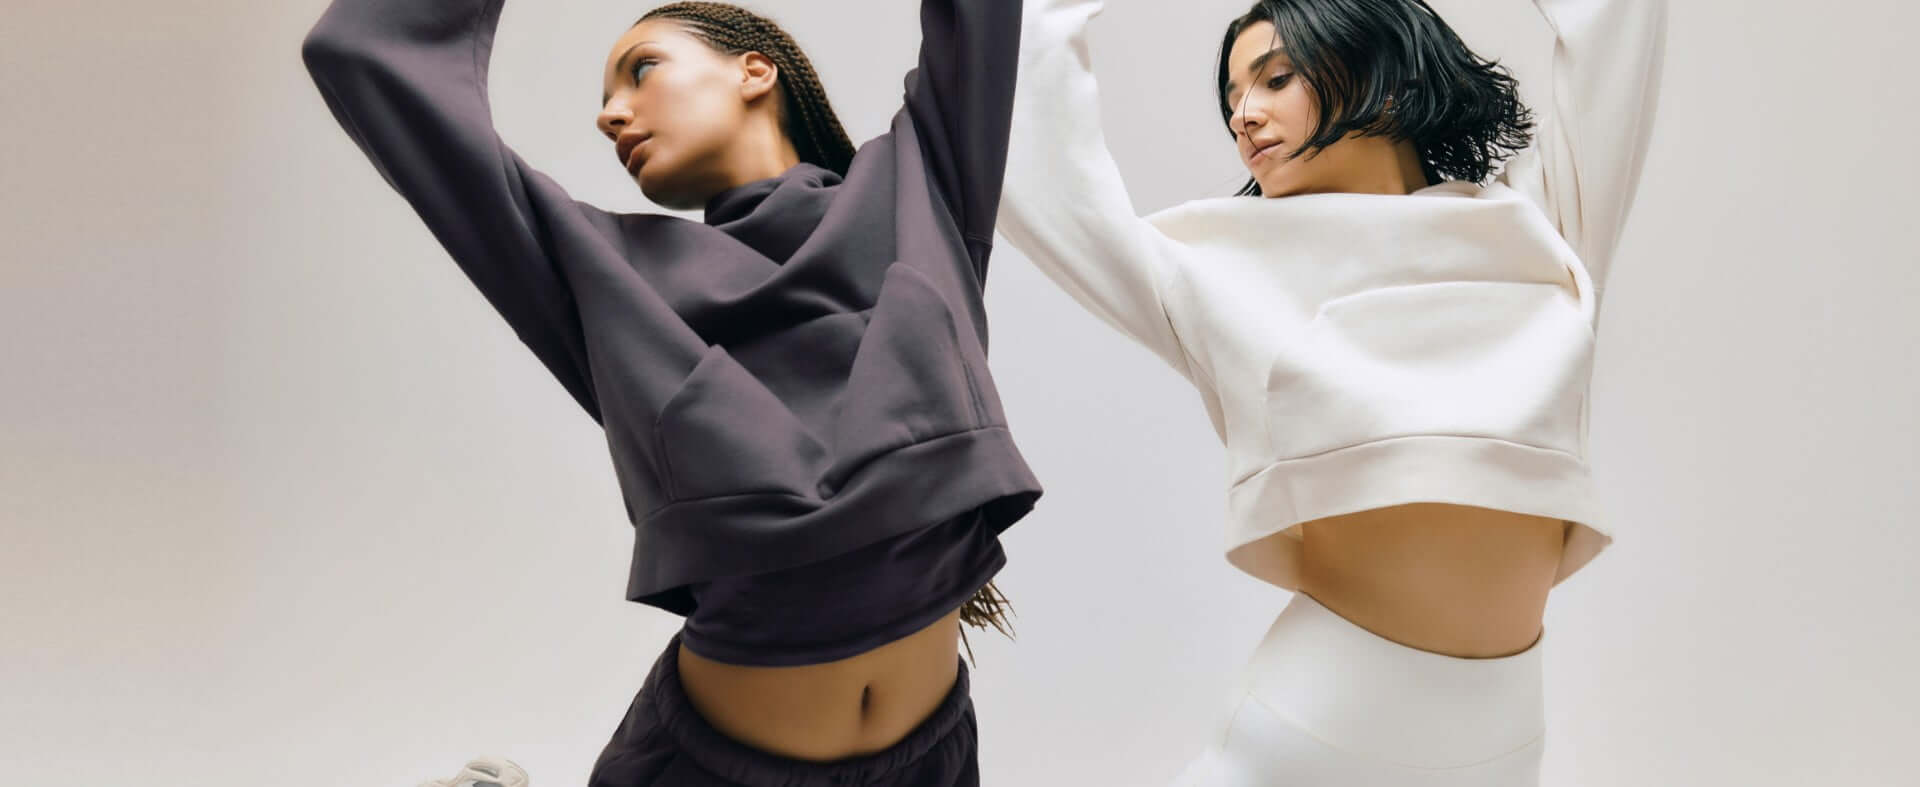 Models poses in matching sweatsuits, one in dark grey and the other in white.